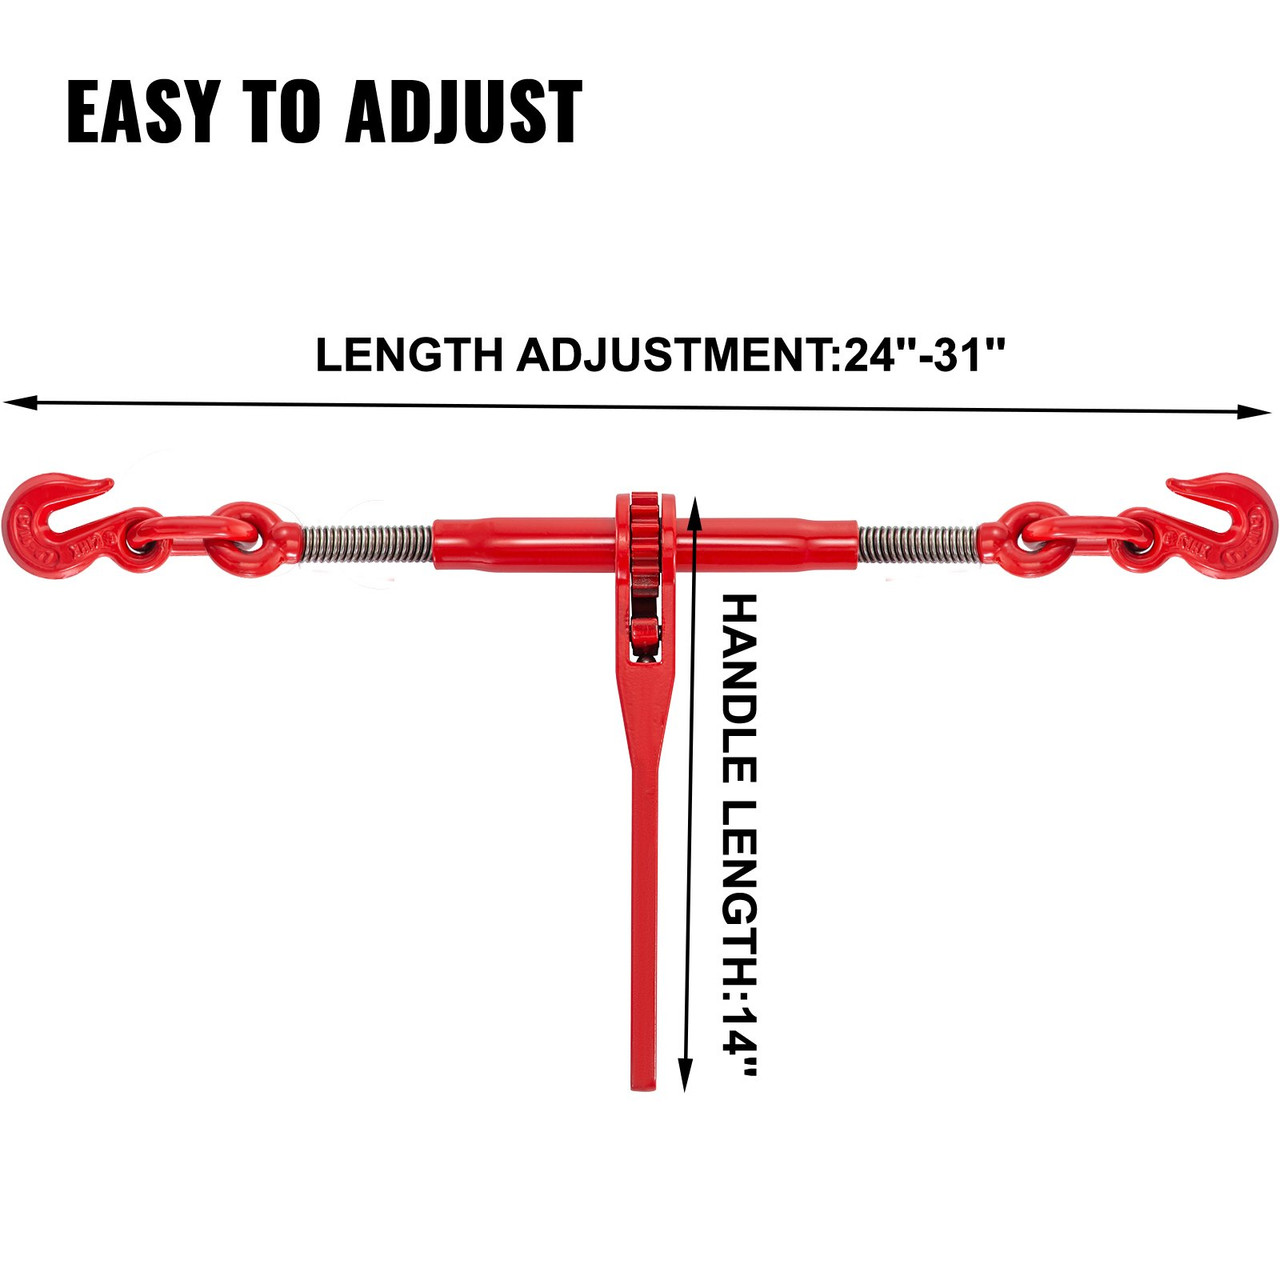 Chain Binder 5/16in x 3/8in, Ratchet Load Binder 6600lbs Capacity, Ratchet Lever Binder w/ G70 Hooks, Adjustable Length, Ratchet Chain Binder for Tie Down, Hauling, Towing, 2-Pack in Red